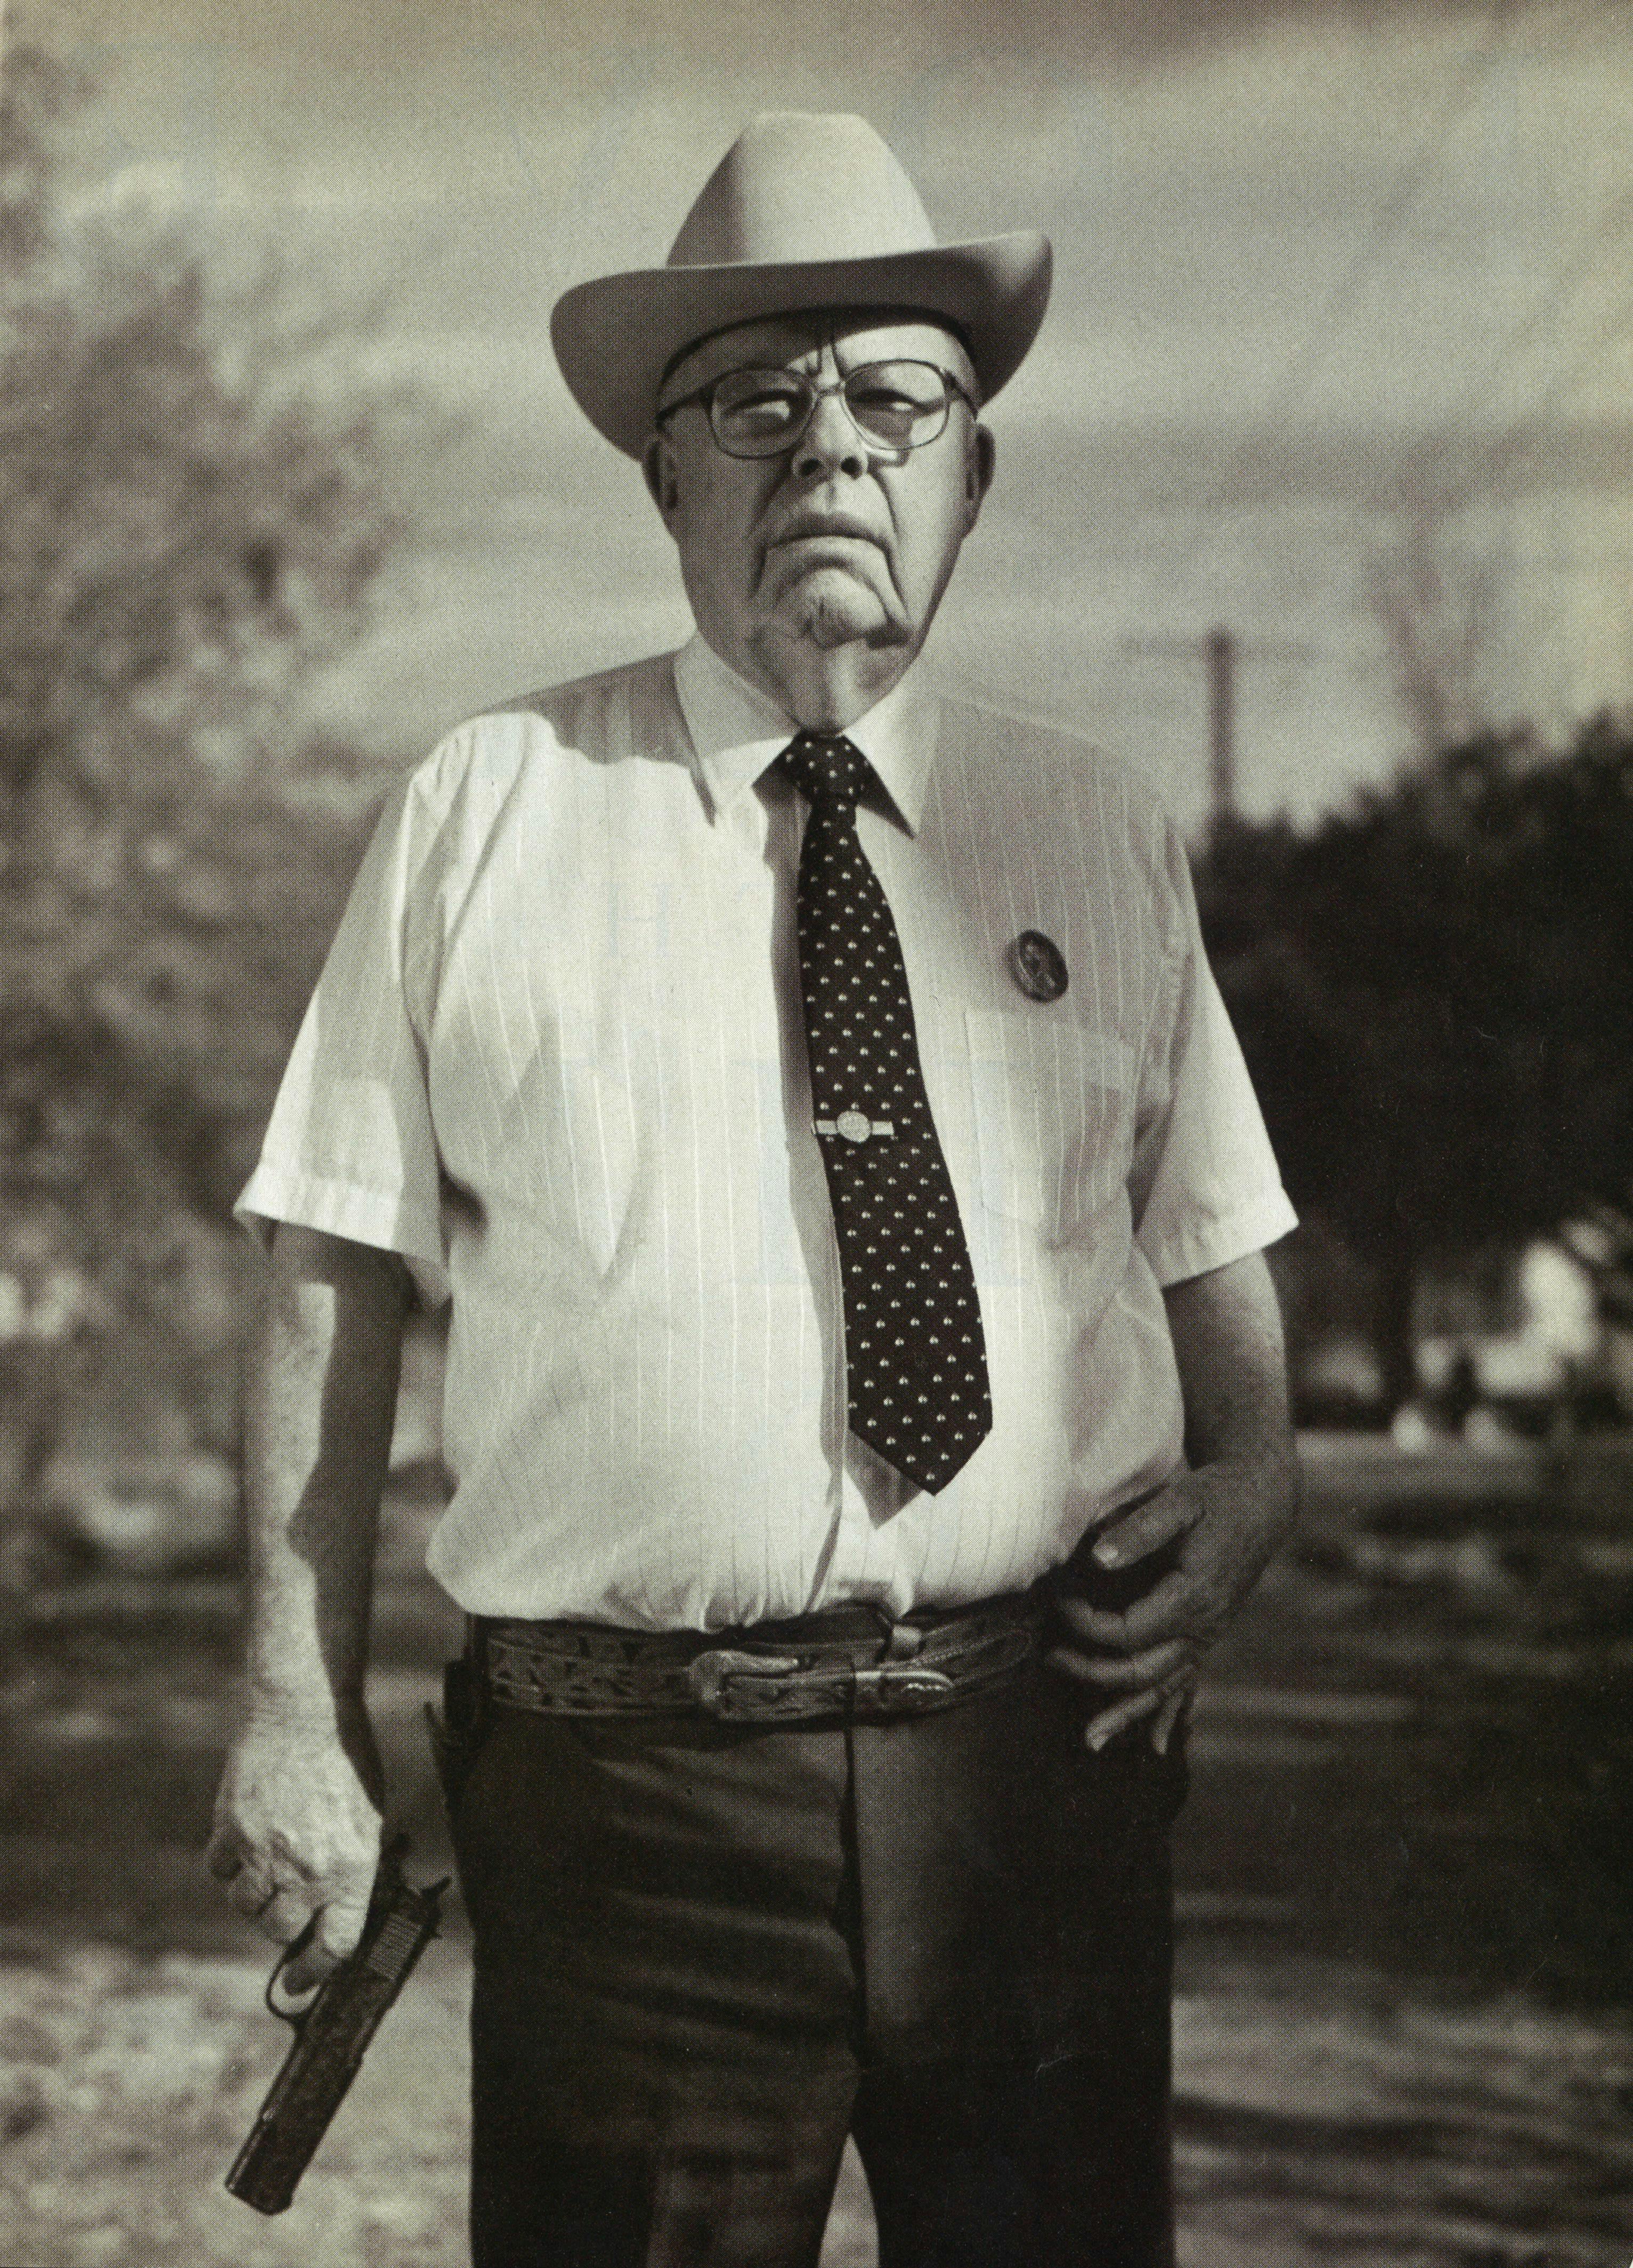 Lewis Rigler of Gainesville was a Ranger from 1947 to 1977.